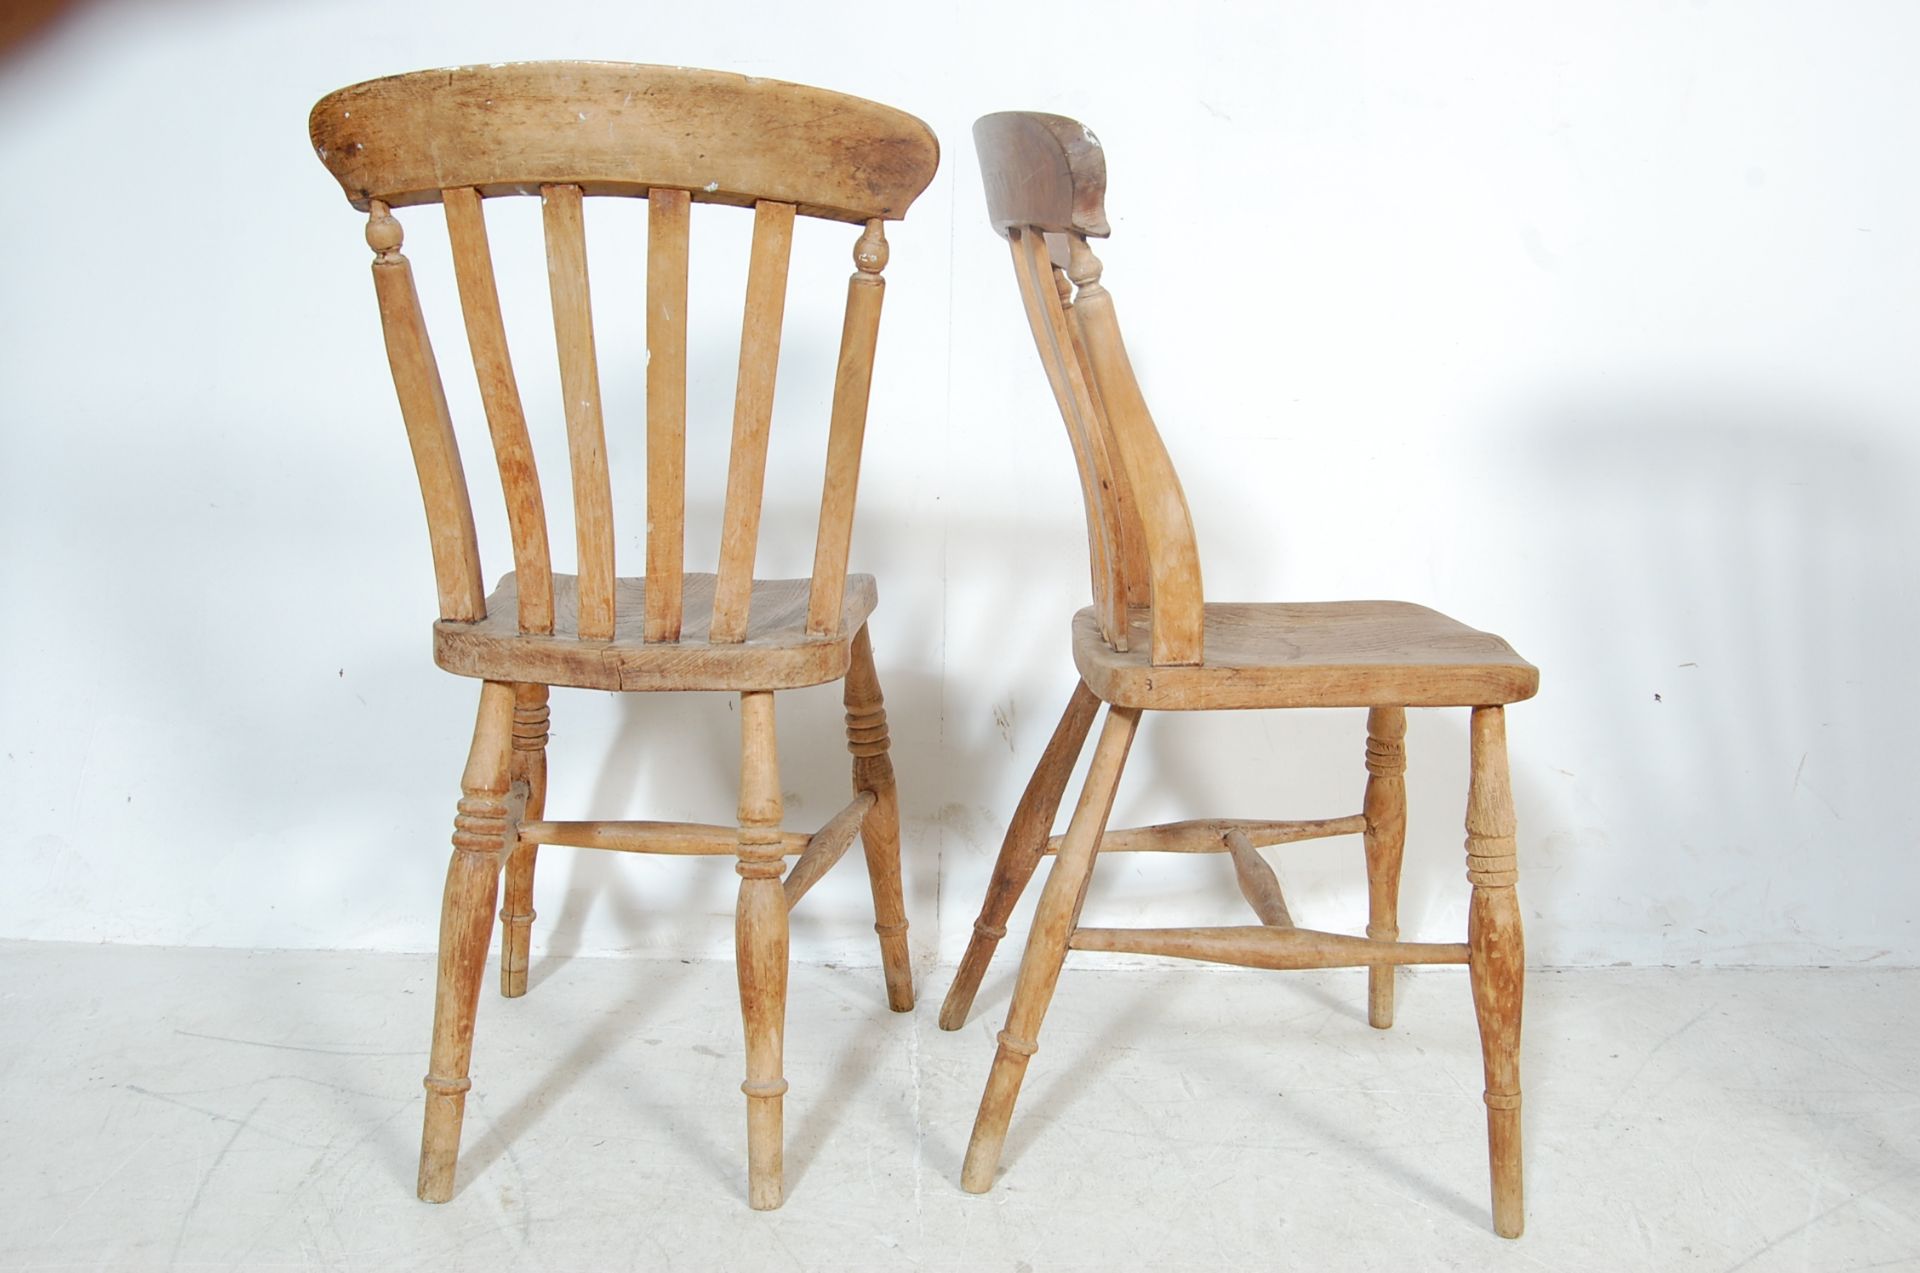 VICTORIAN 19TH CENTURY BEECH & ELM DINING CHAIRS - Image 7 of 7